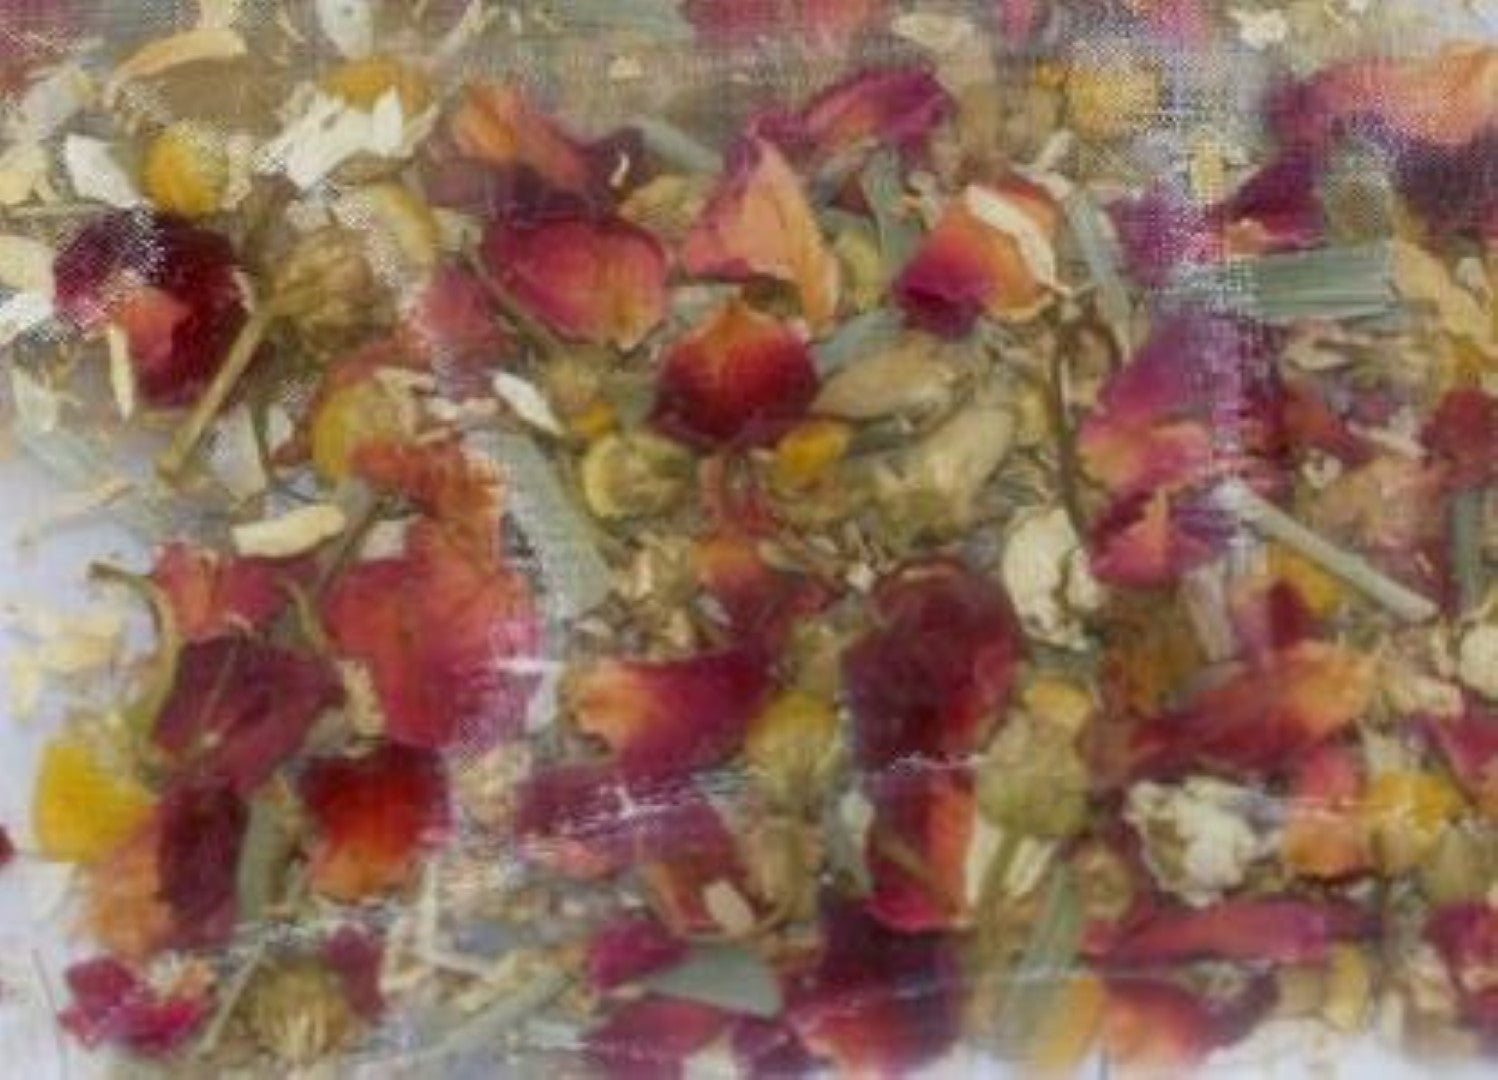 RELAX Tea Herbal Botanicals Flowers - Beautiful for soap toppings